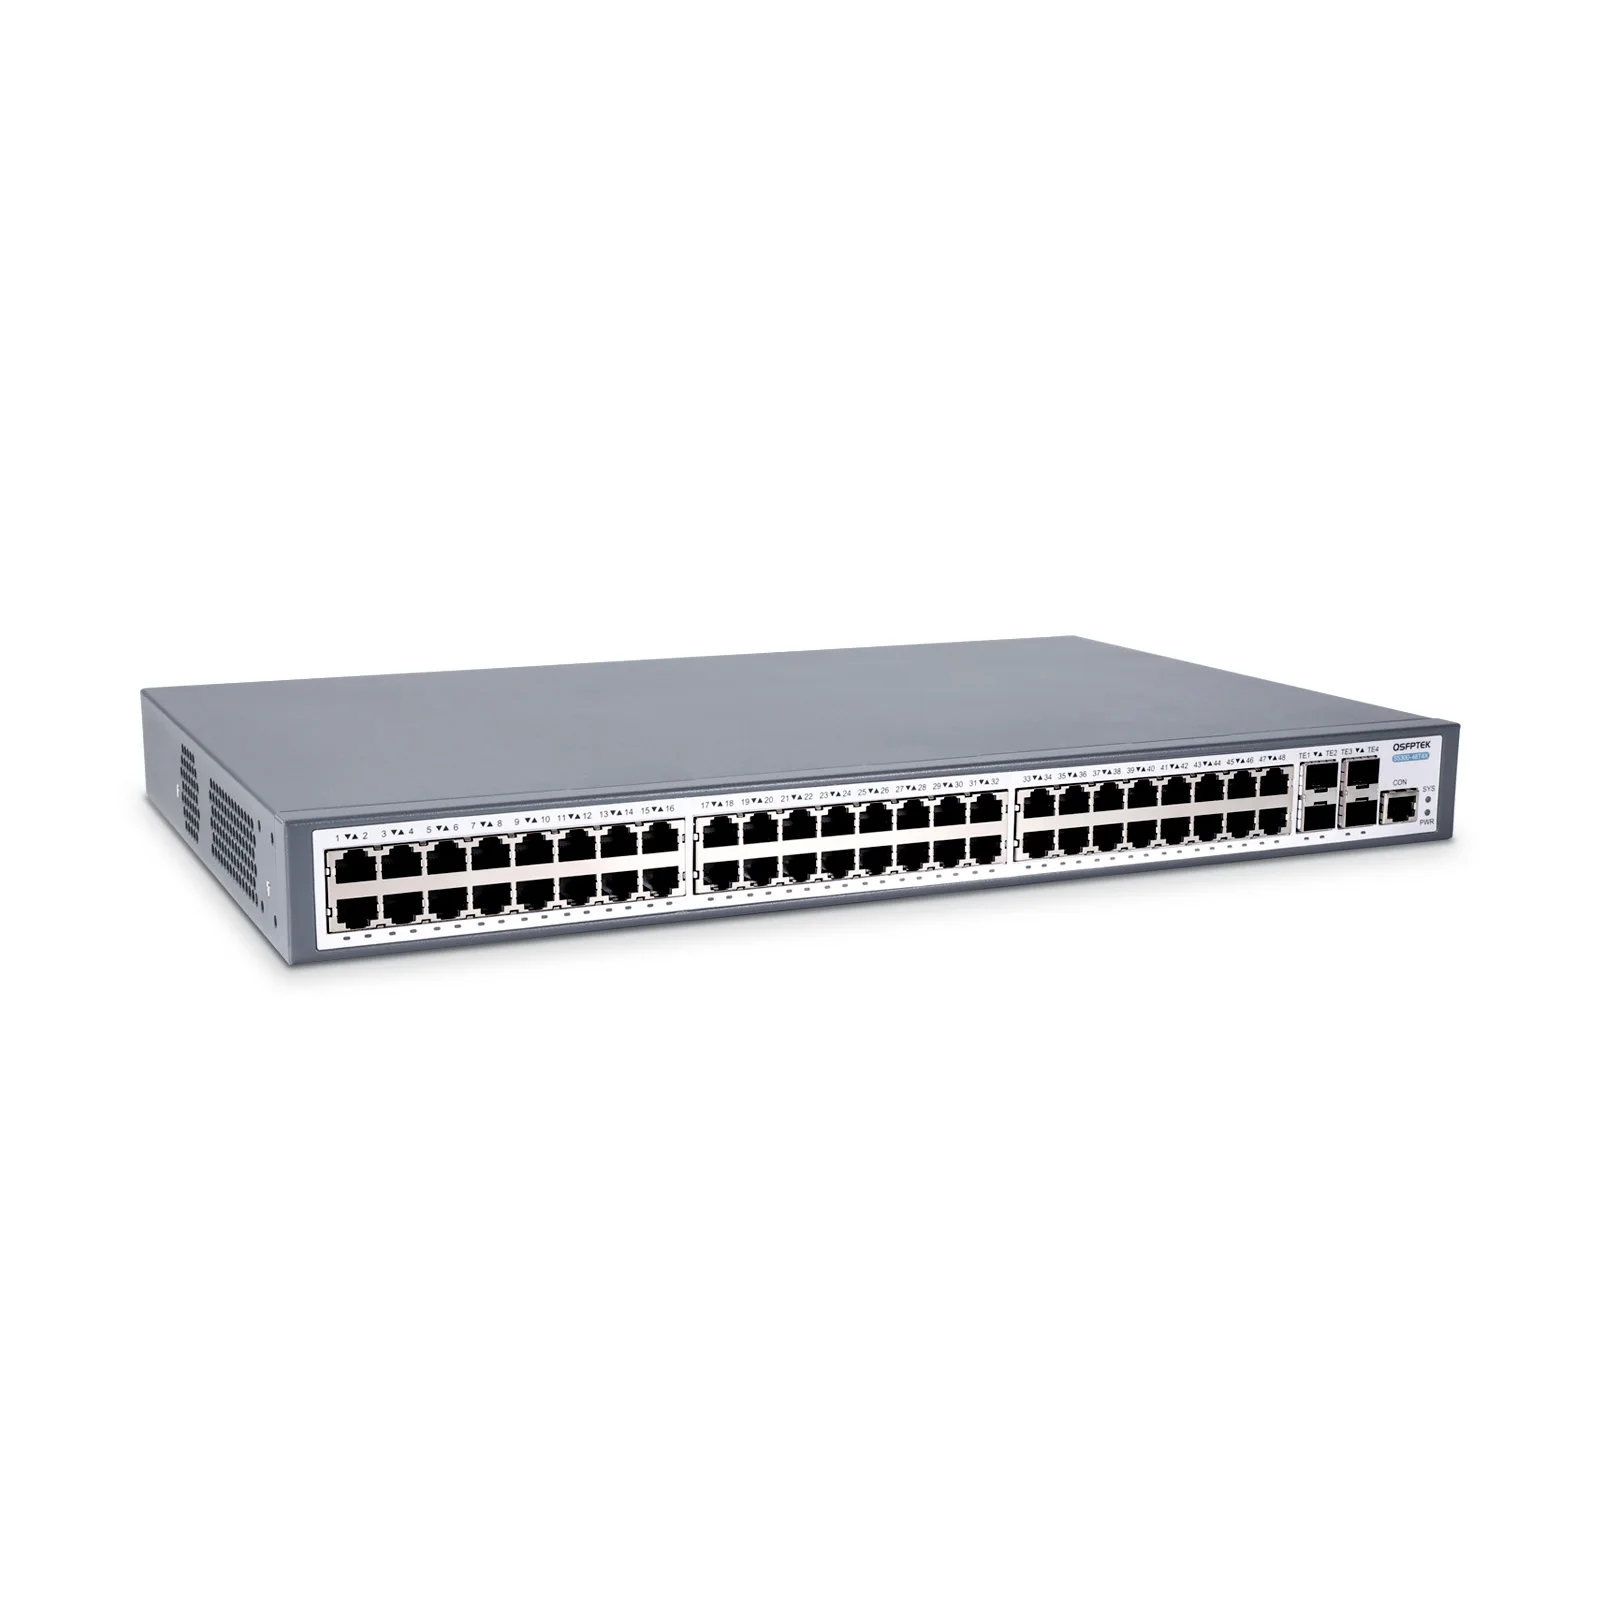 32-Port Industrial Rackmount Managed Switch, 10G